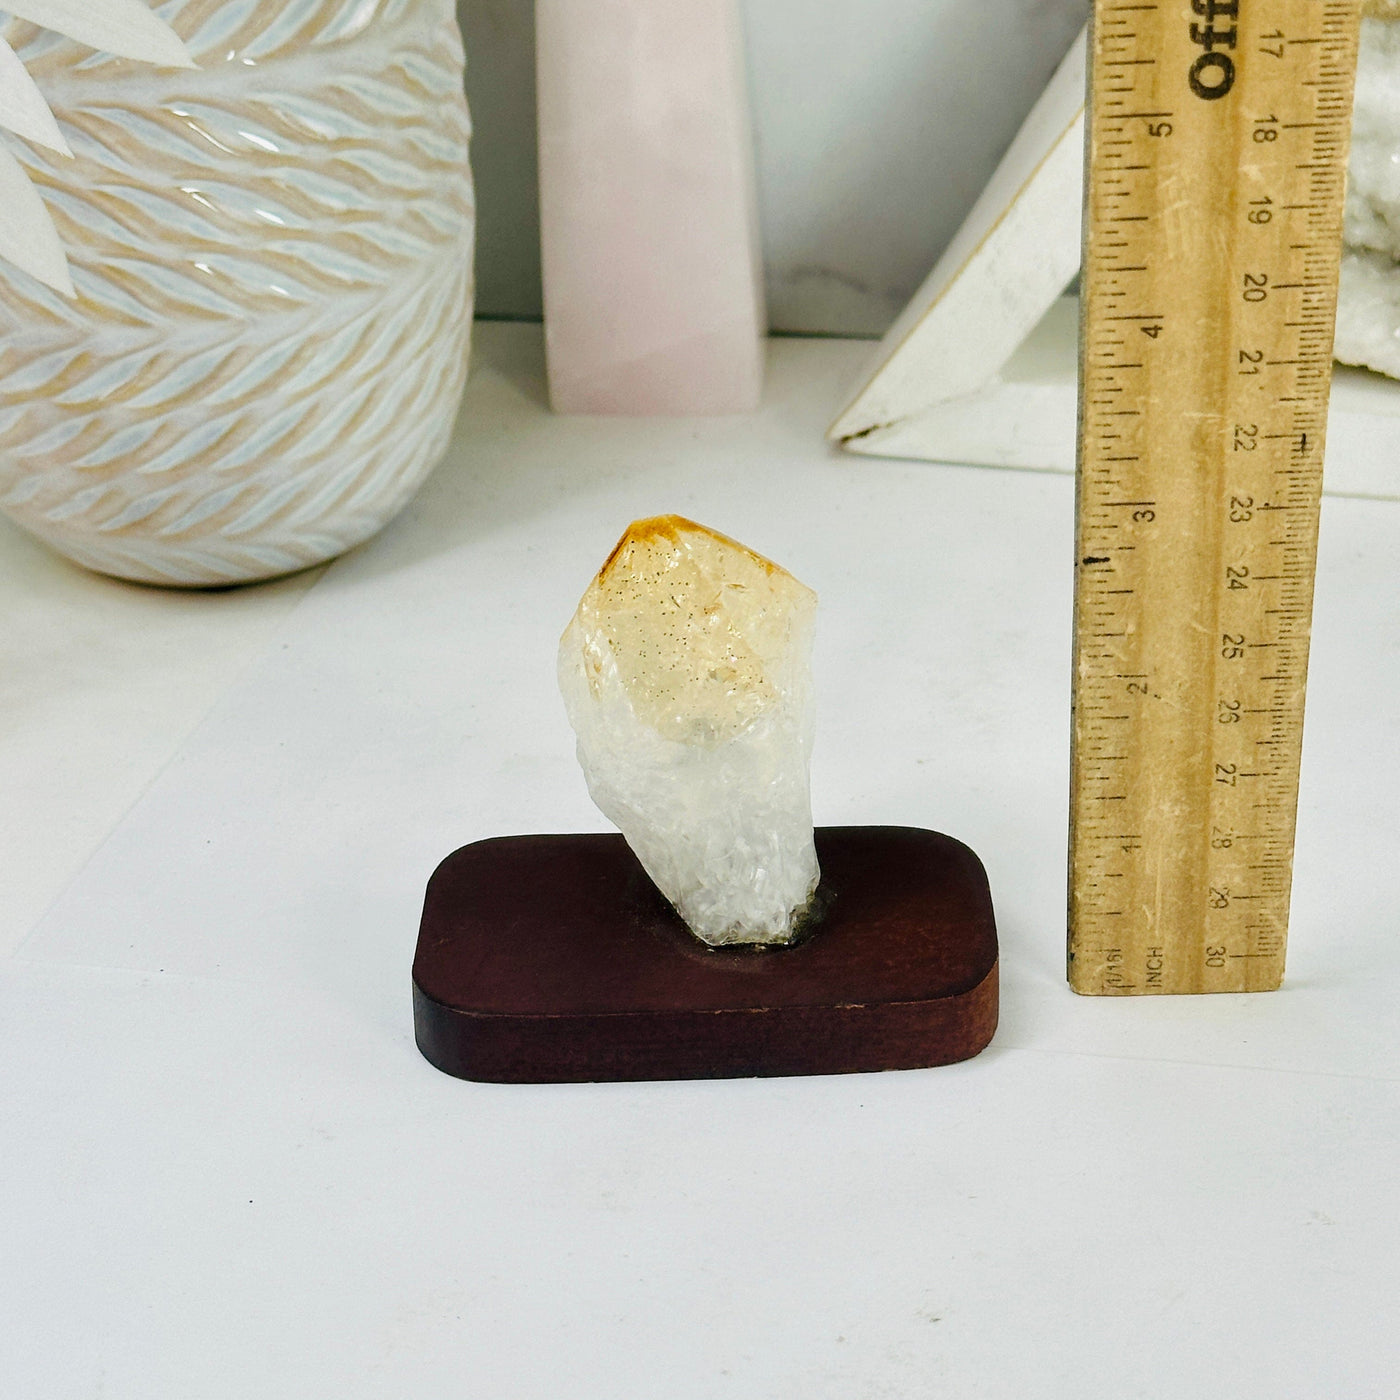 Citrine Point on Wooden Base with ruler for size reference